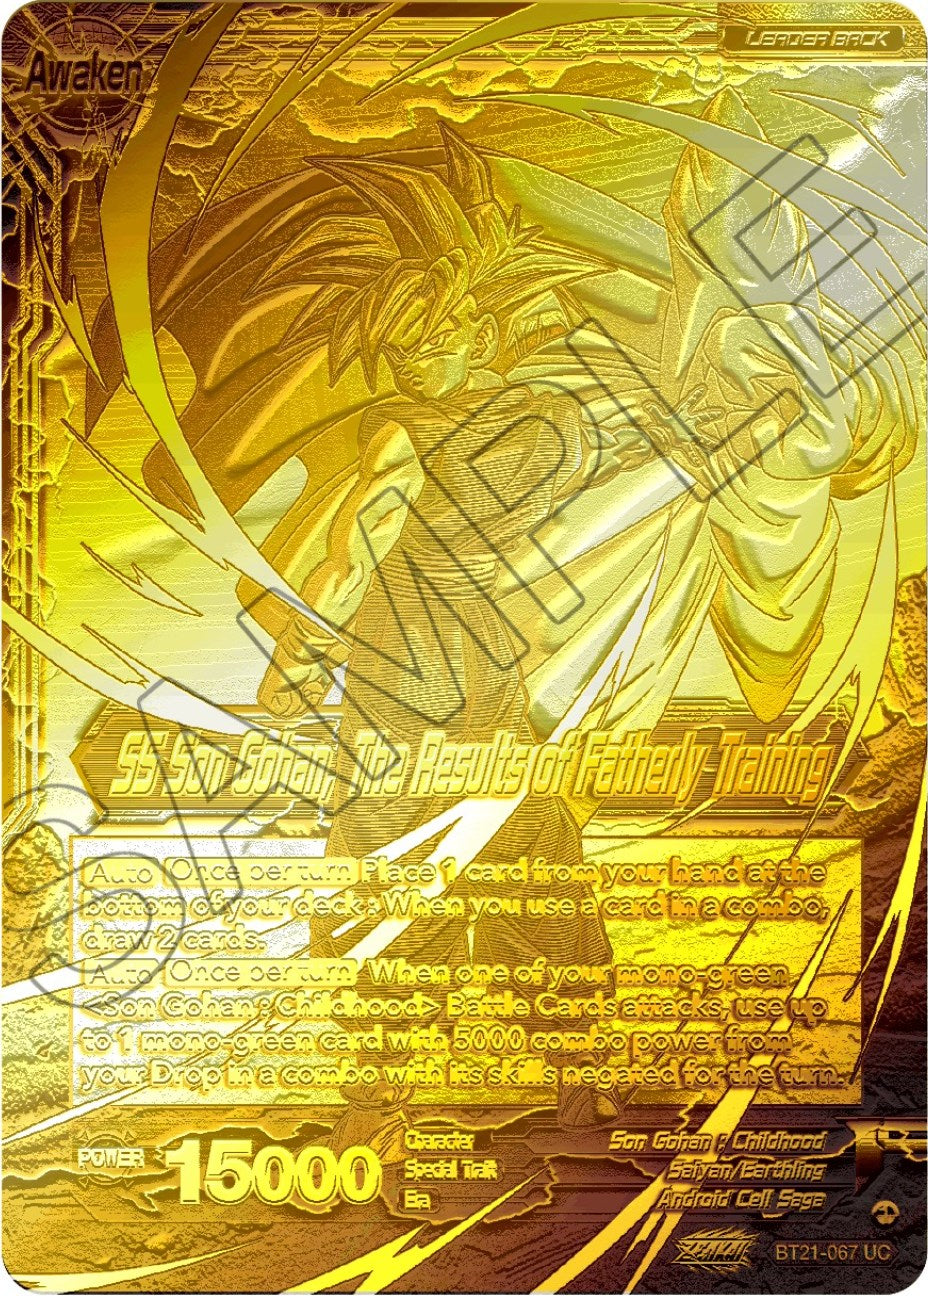 Son Gohan // SS Son Gohan, The Results of Fatherly Training (2023 Championship Finals) (Gold Metal Foil) (BT21-067) [Tournament Promotion Cards] | Sanctuary Gaming